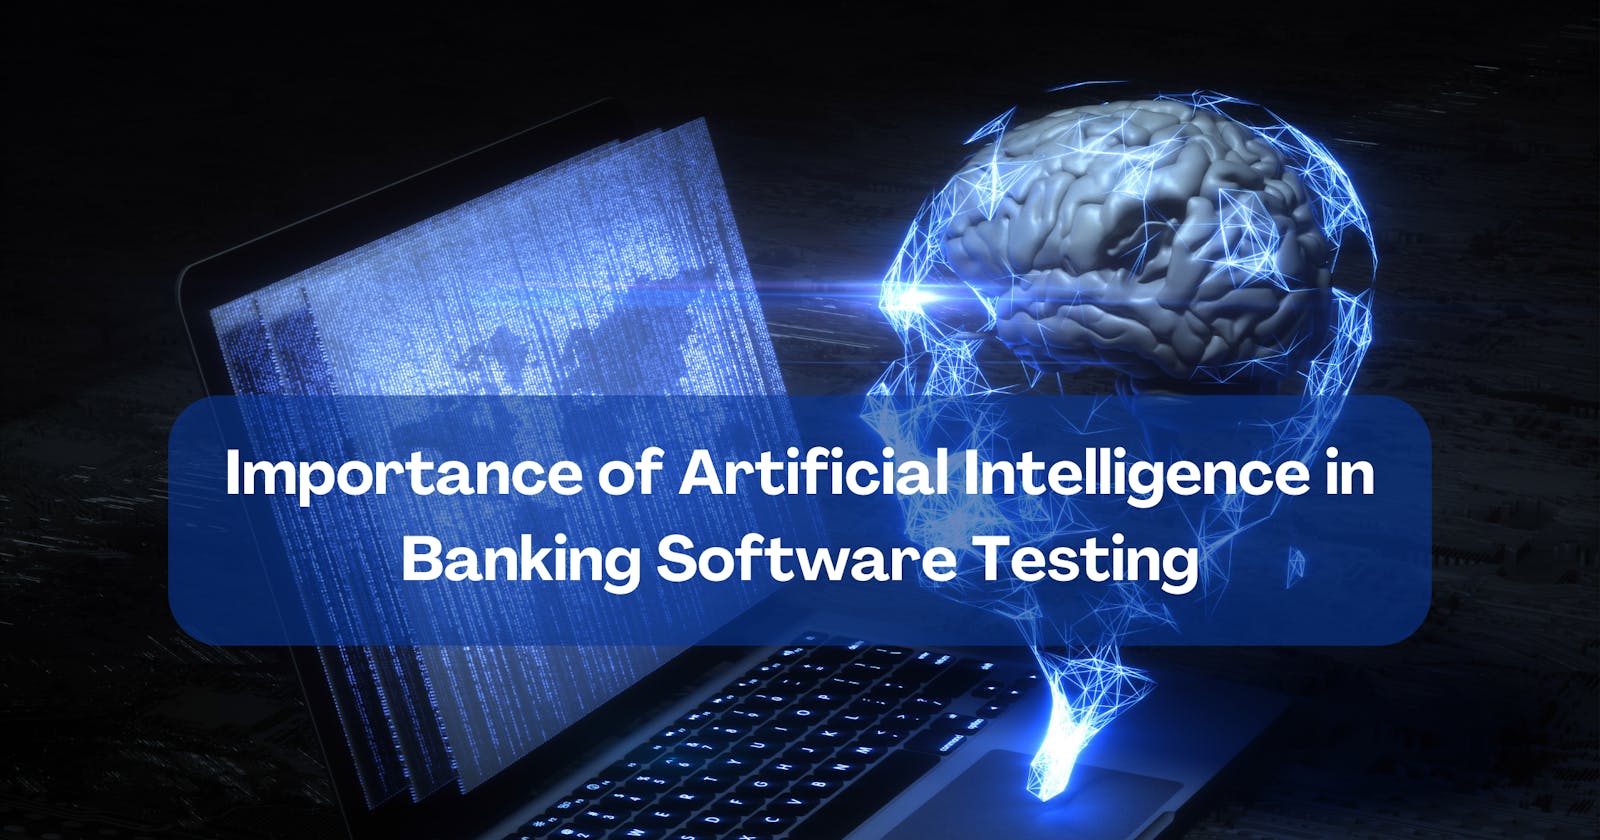 Importance of Artificial Intelligence in Banking Software Testing